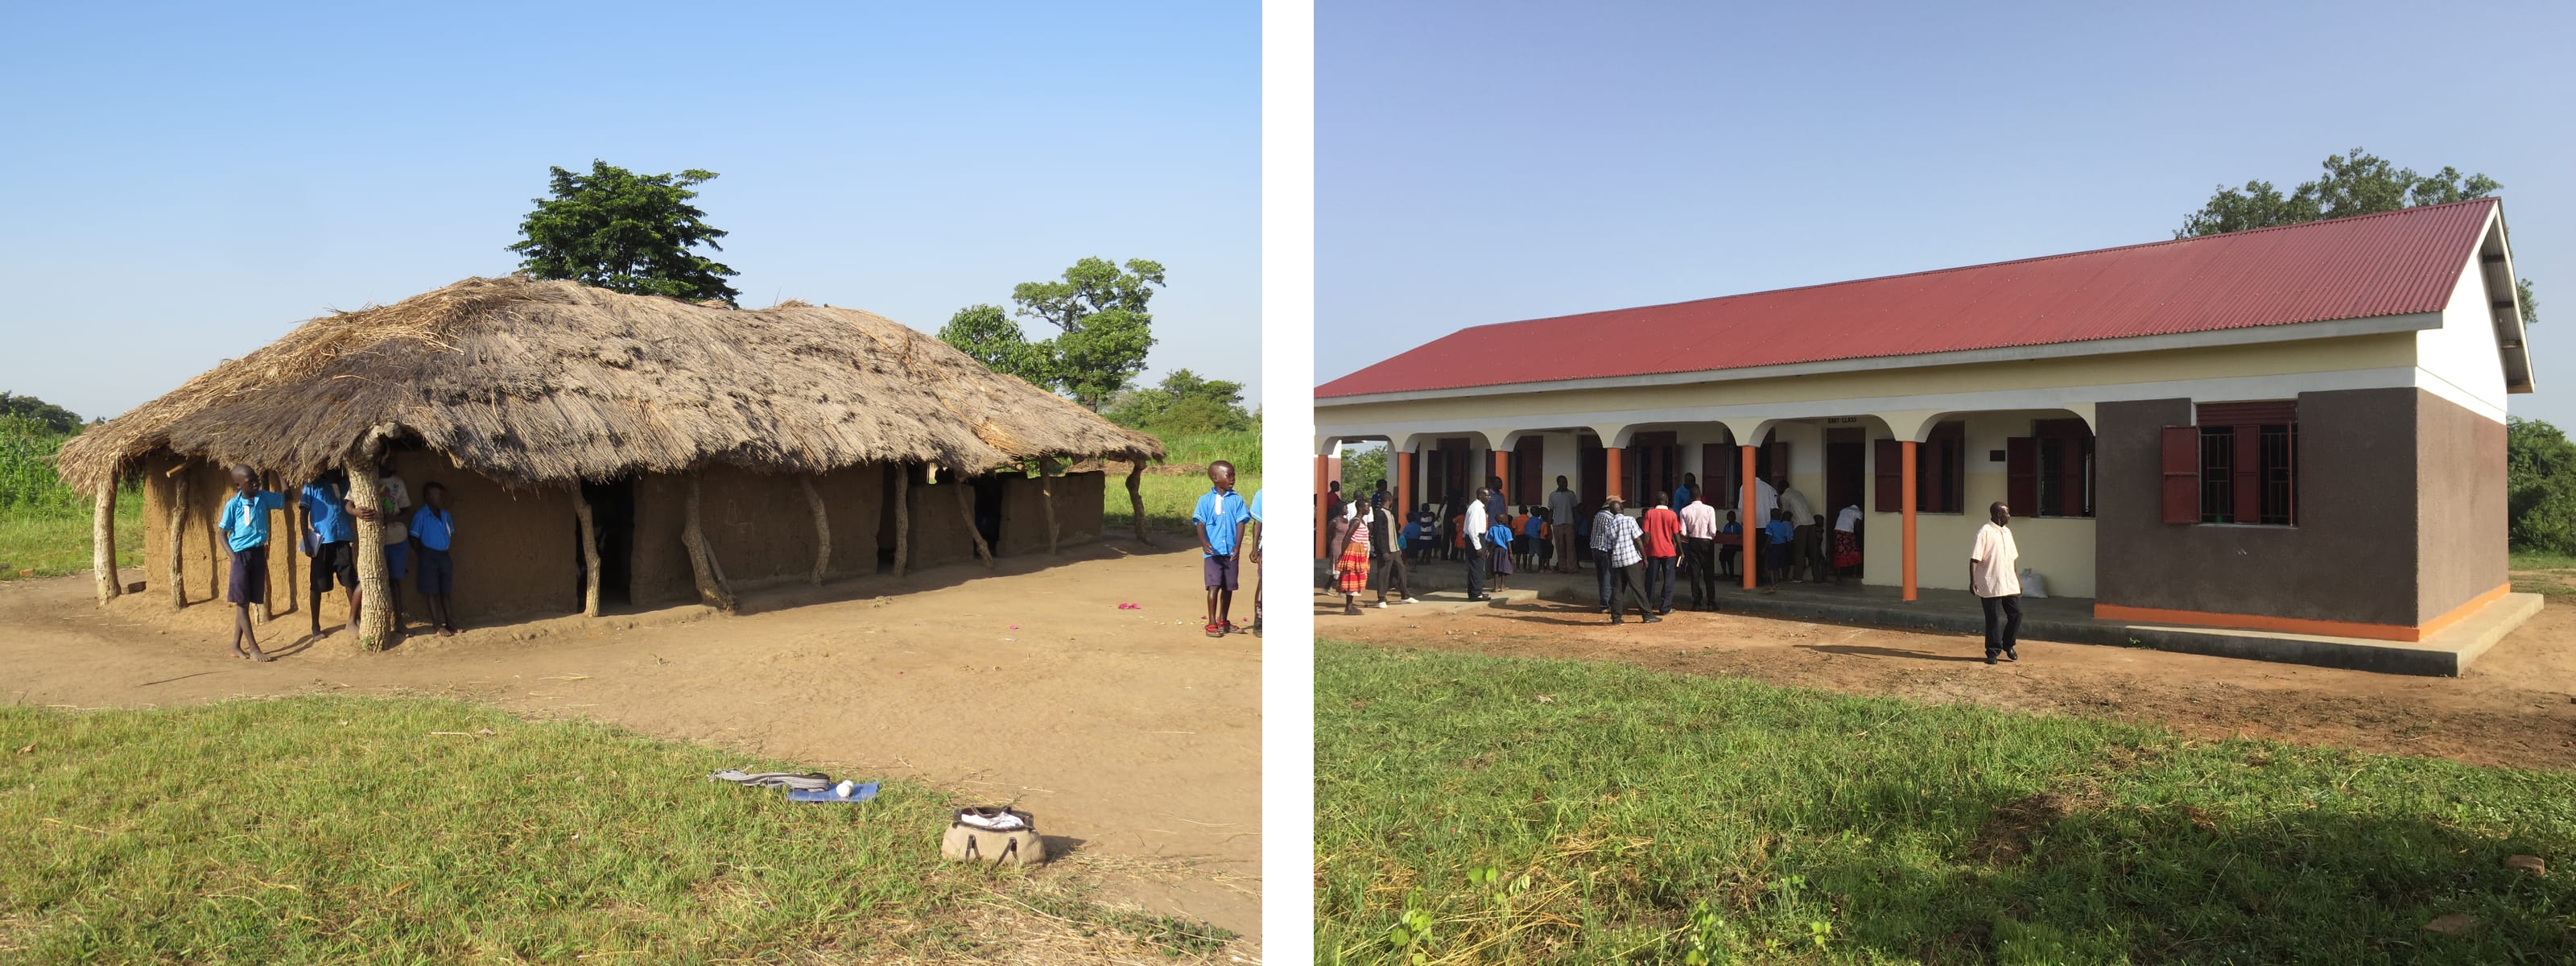 Before and after at Okweta Primary School, Uganda